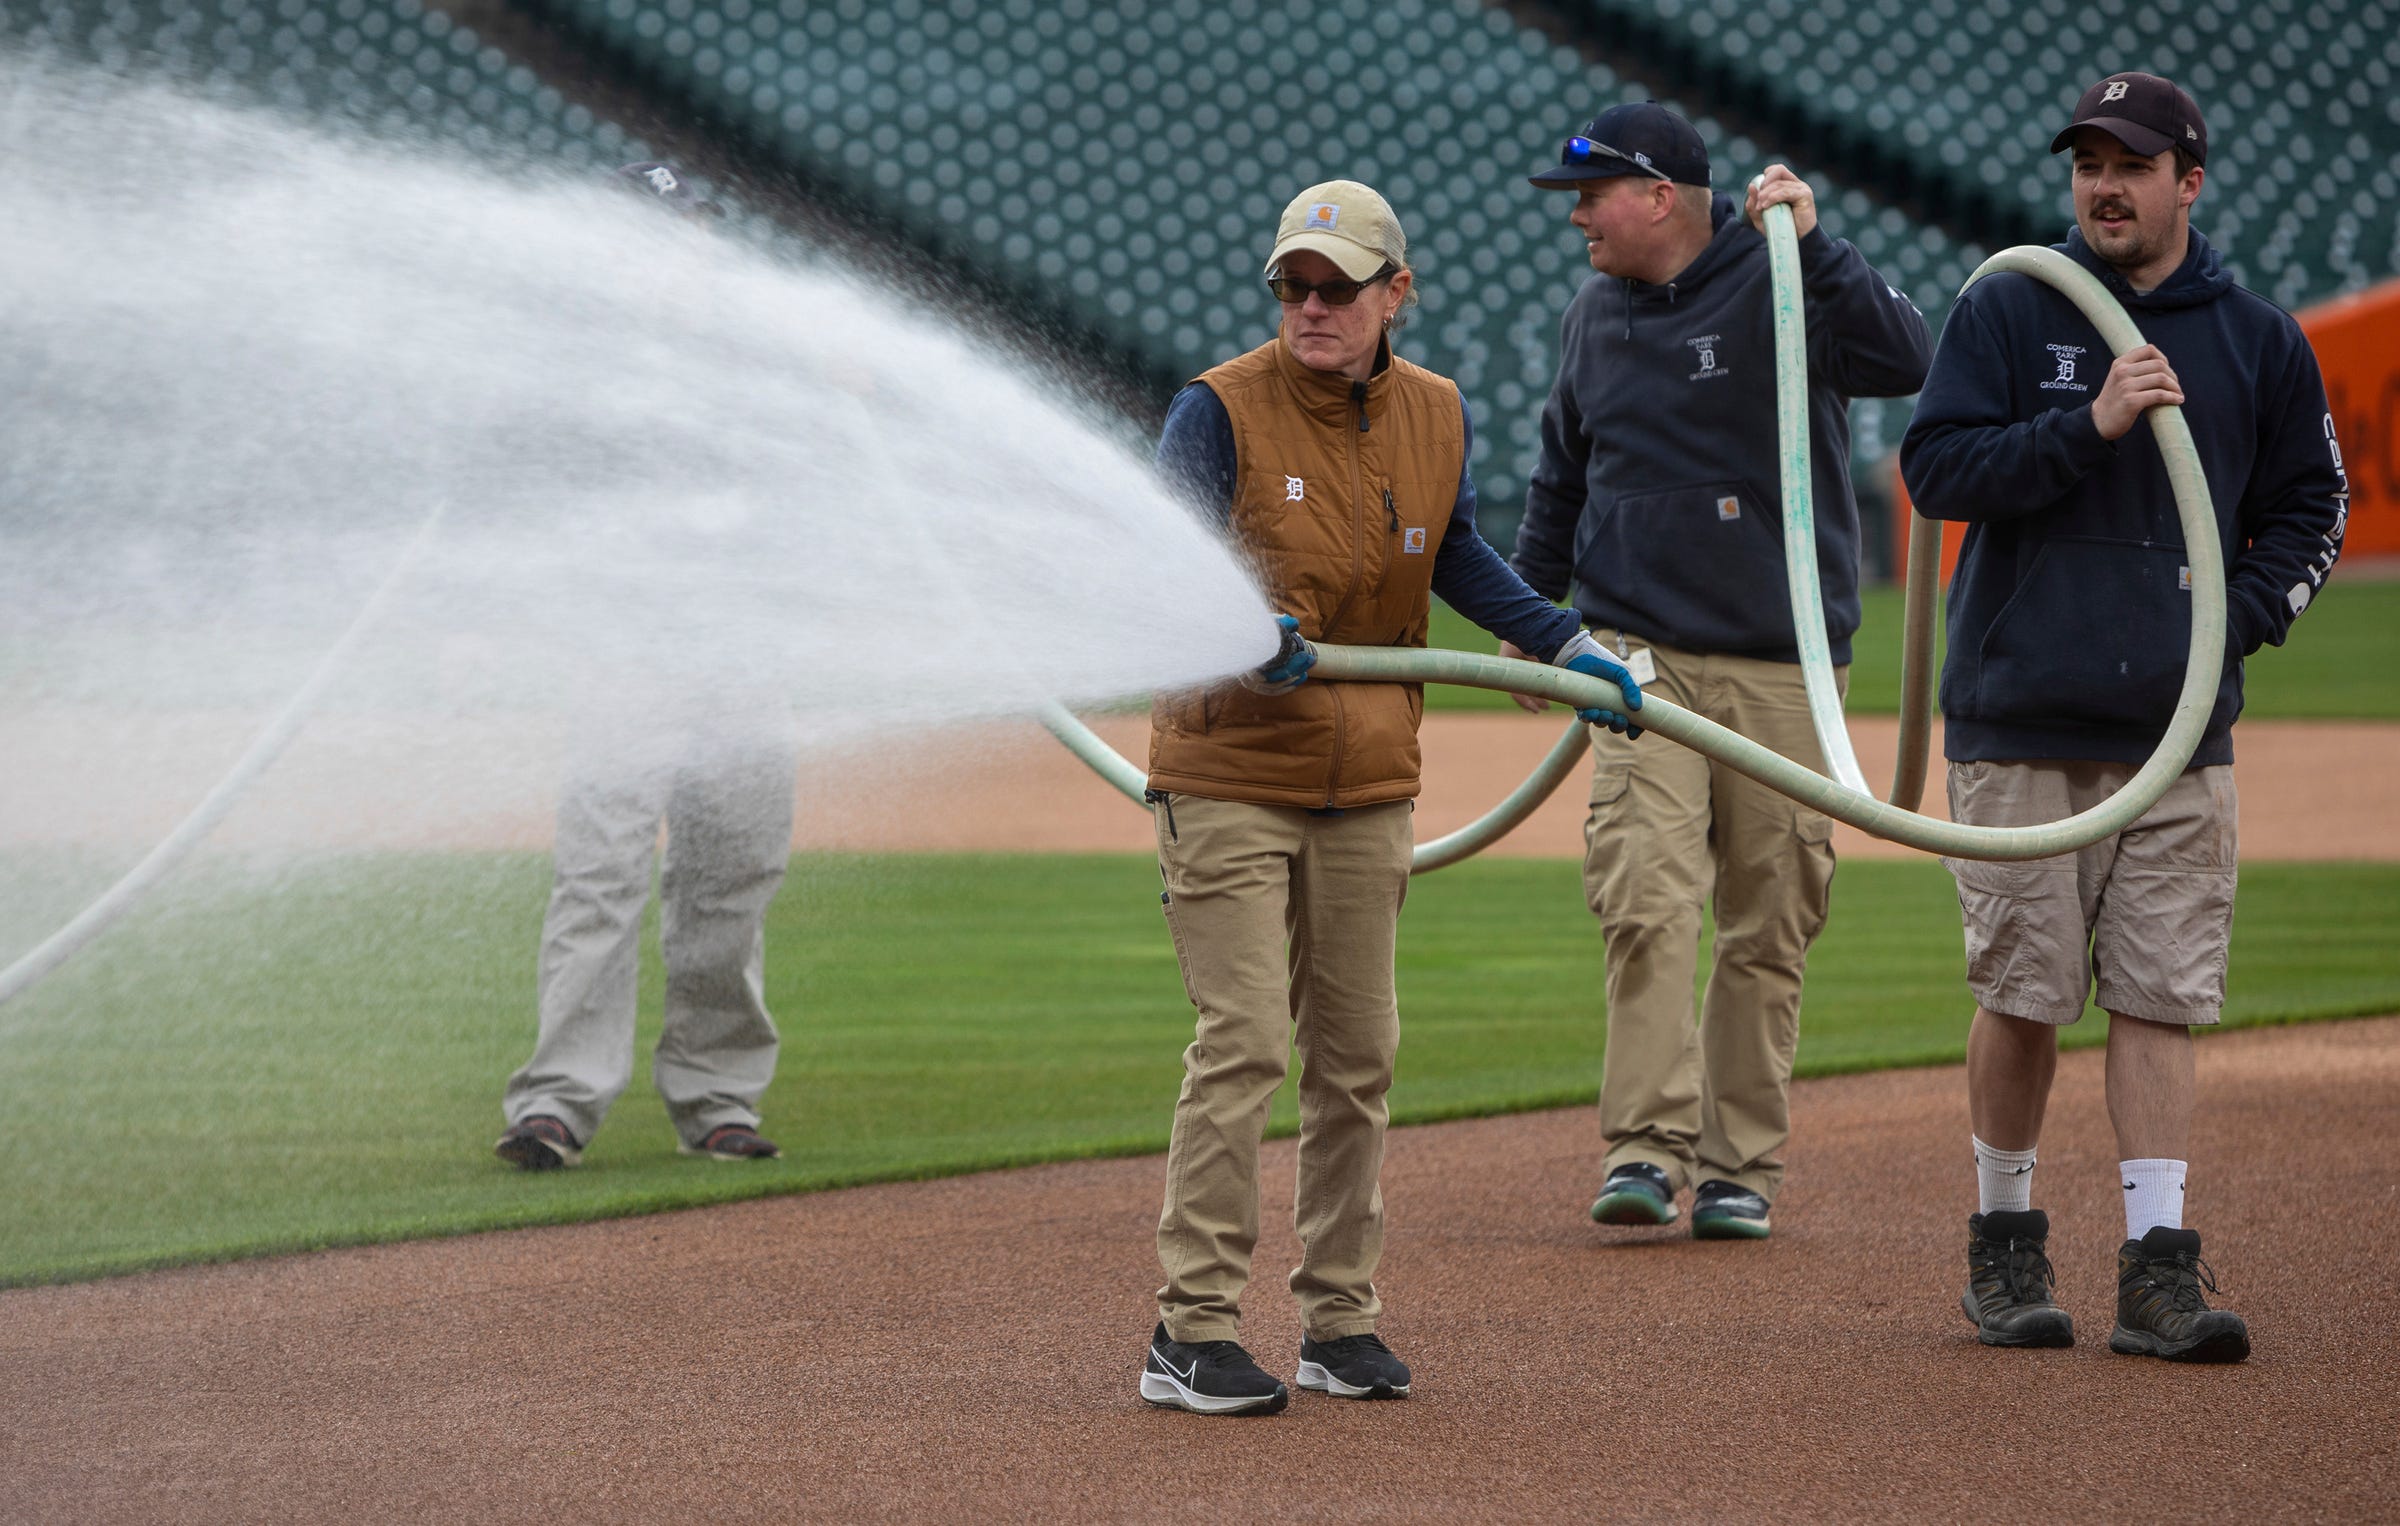 Heather Nabozny, the head groundkeeper for the Detroit Tigers, waters the "skin," which refers to the infield soil, with members of her ground crew during the Detroit Tigers' Opening Day at Comerica Park in Detroit on Thursday, April 6, 2023.